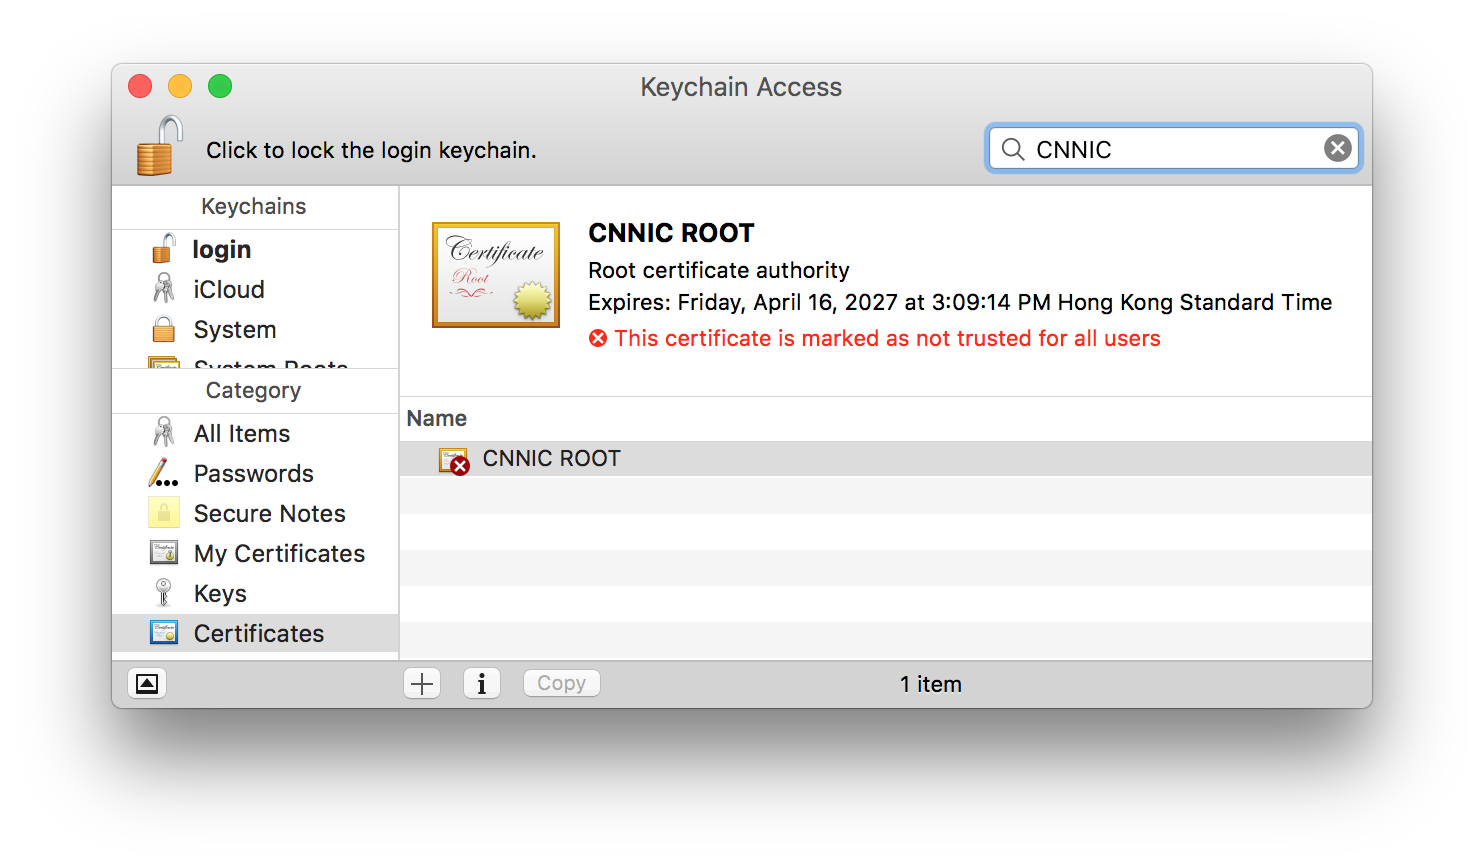 Don’t trust CNNIC's root certificate